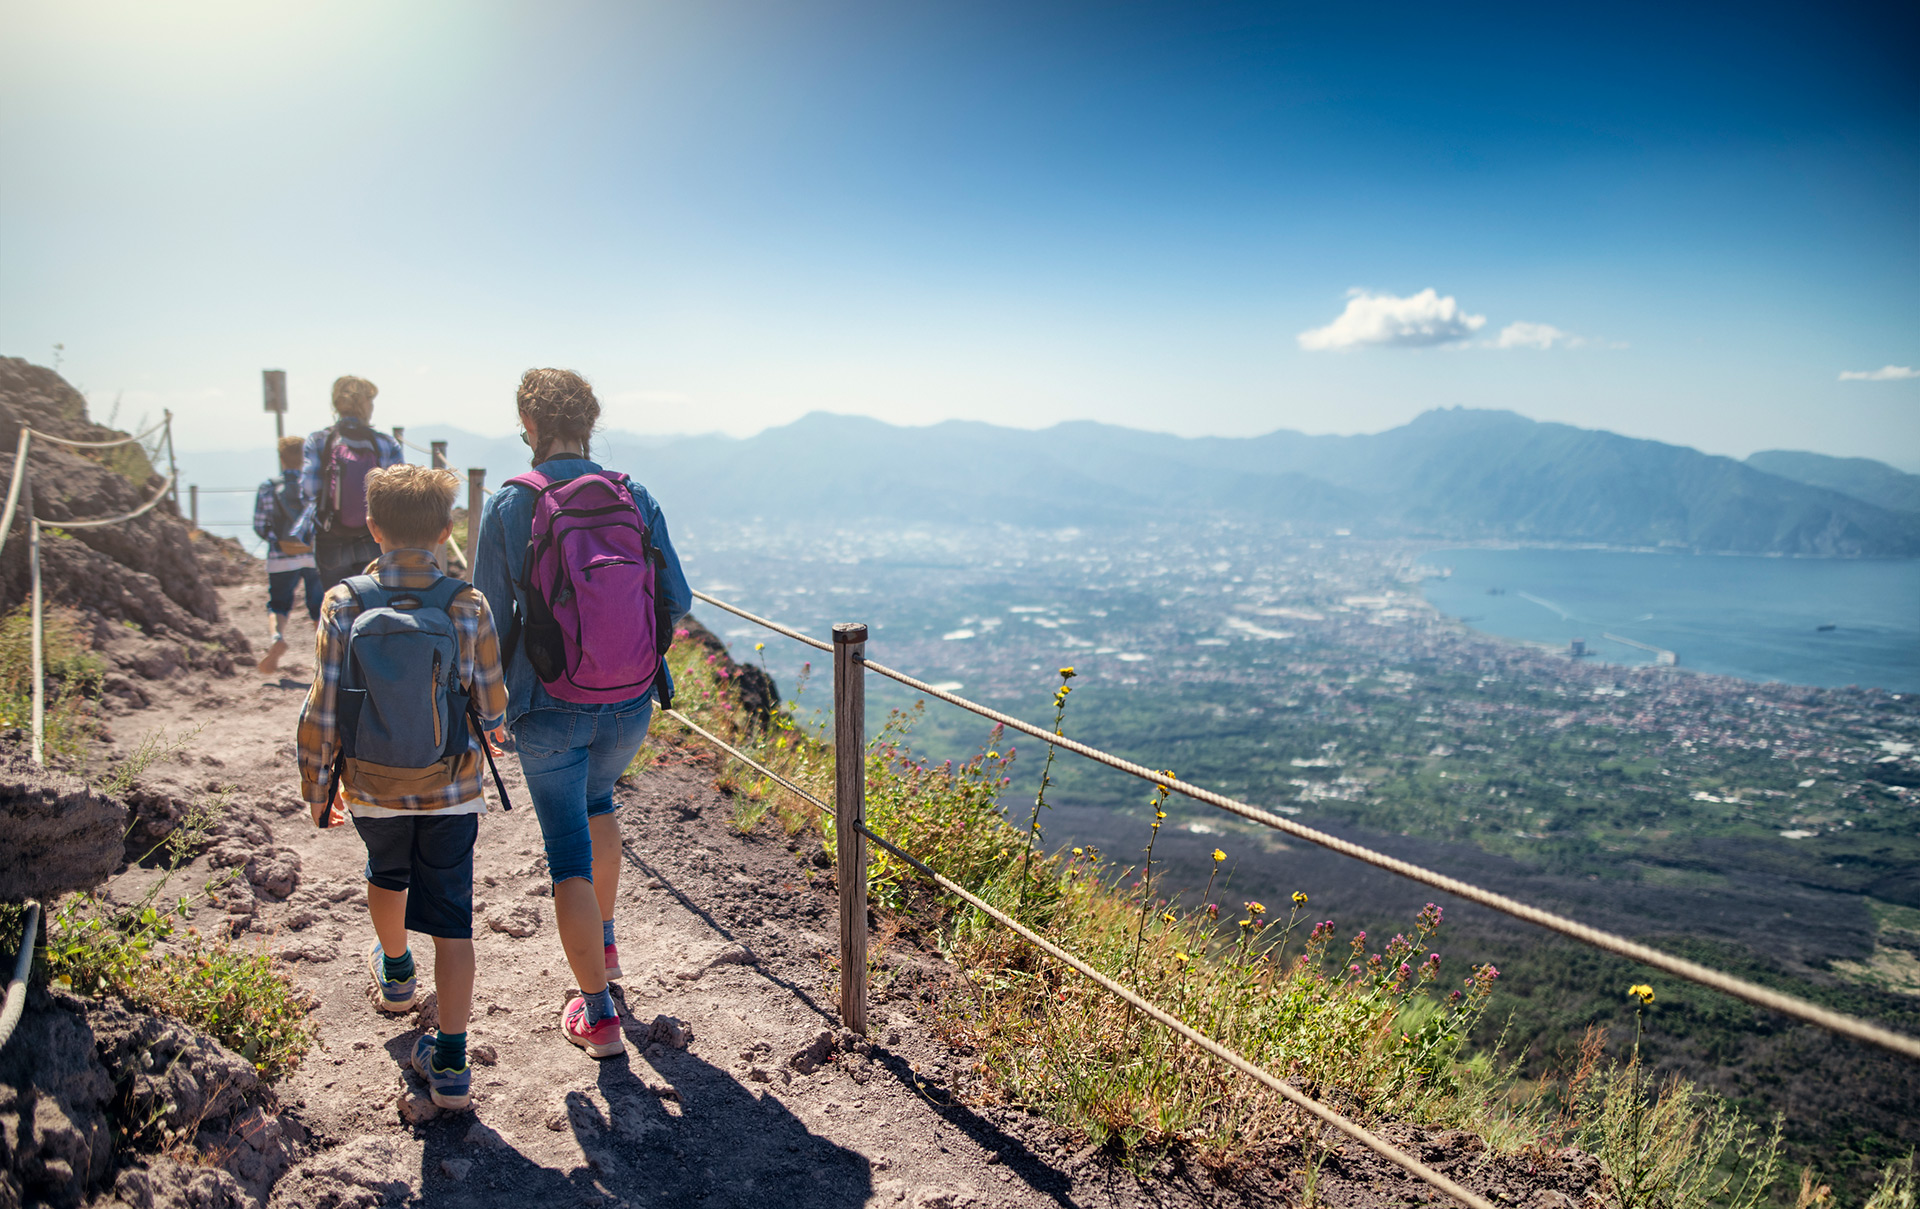 Private Excursion to the ancient Pompeii with a stop at Vesuvius